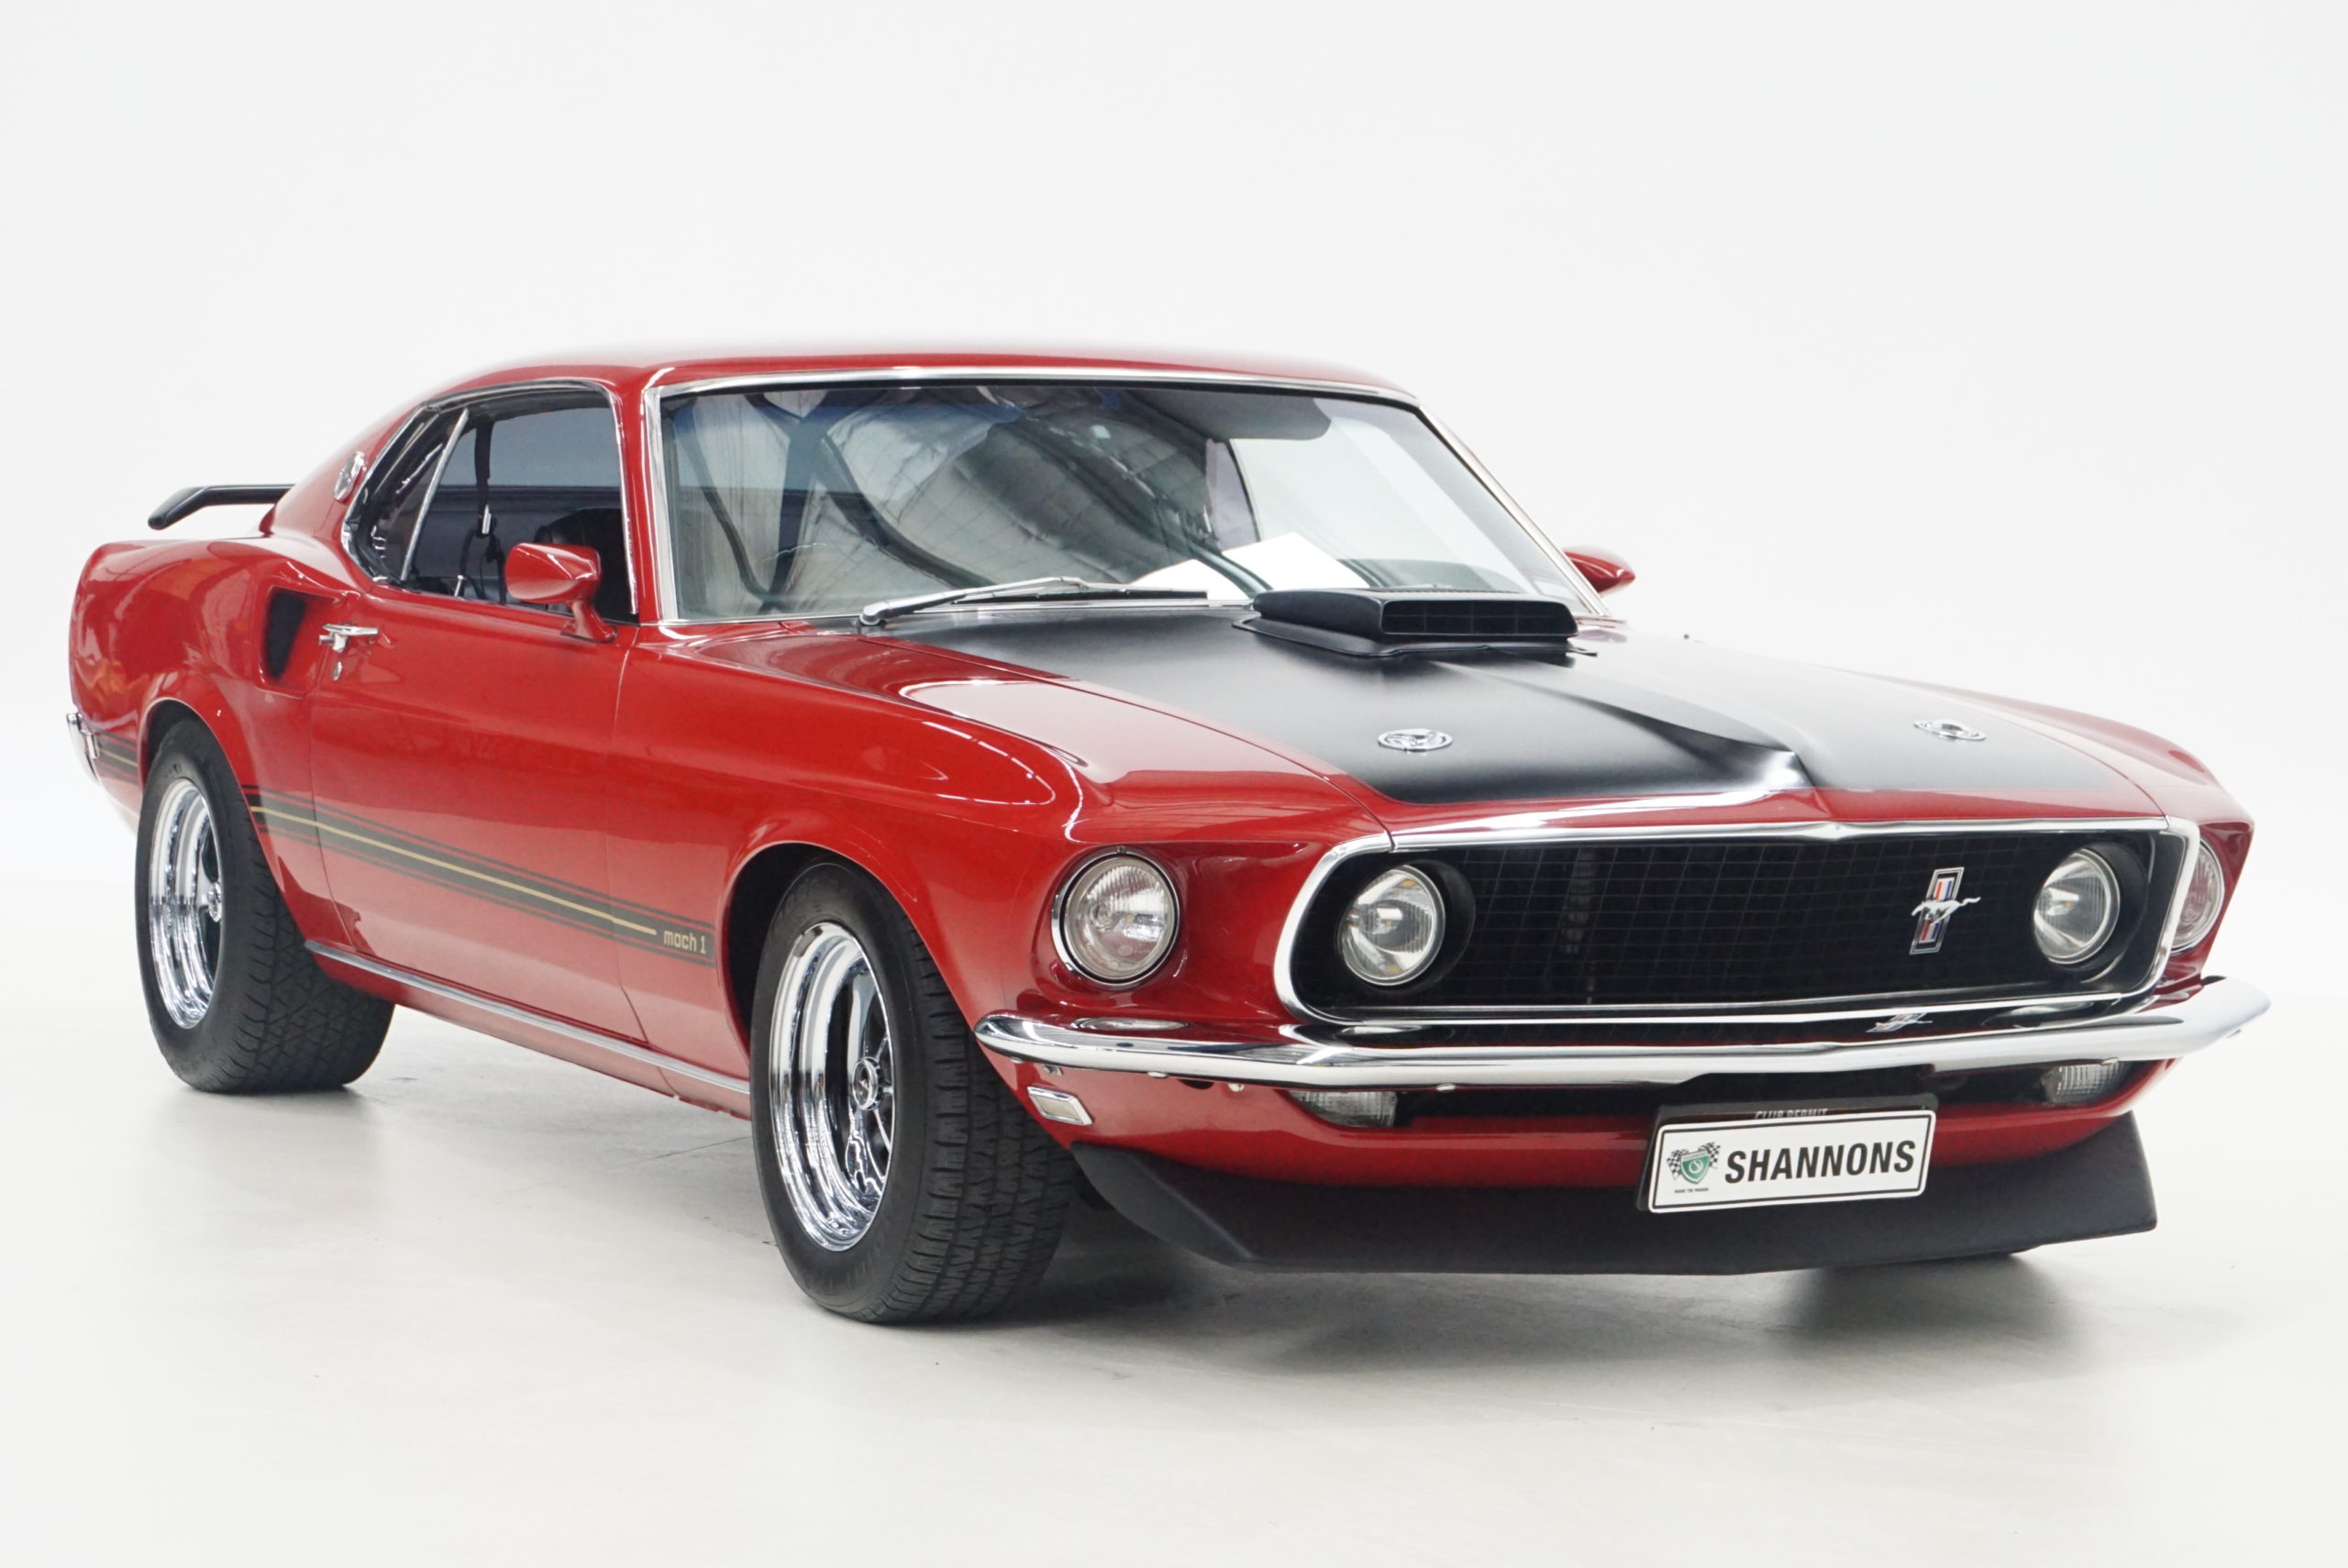 1969 Ford Mustang Mach 1 Fastback trois quarts avant droit - Shannons Auctions avril 2021.